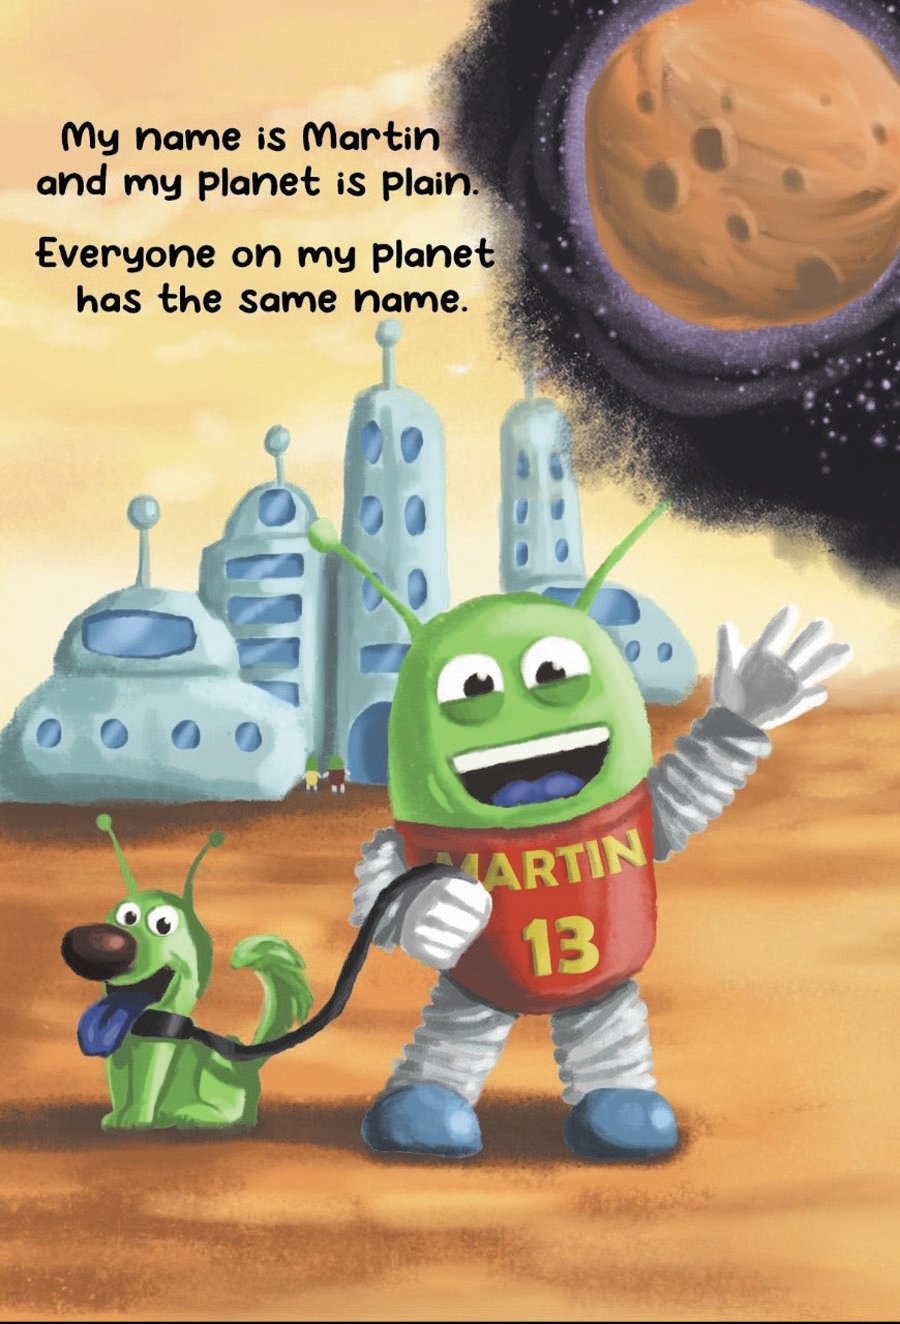 MEET MARTIN THE MARTIAN: Martin lives on a plain planet and leaves to discover a colorful planet full of beauty. The planet’s adults, however, cannot see him while they are paying attention to their phones. The book is meant to teach children the importance of monitoring screen time.